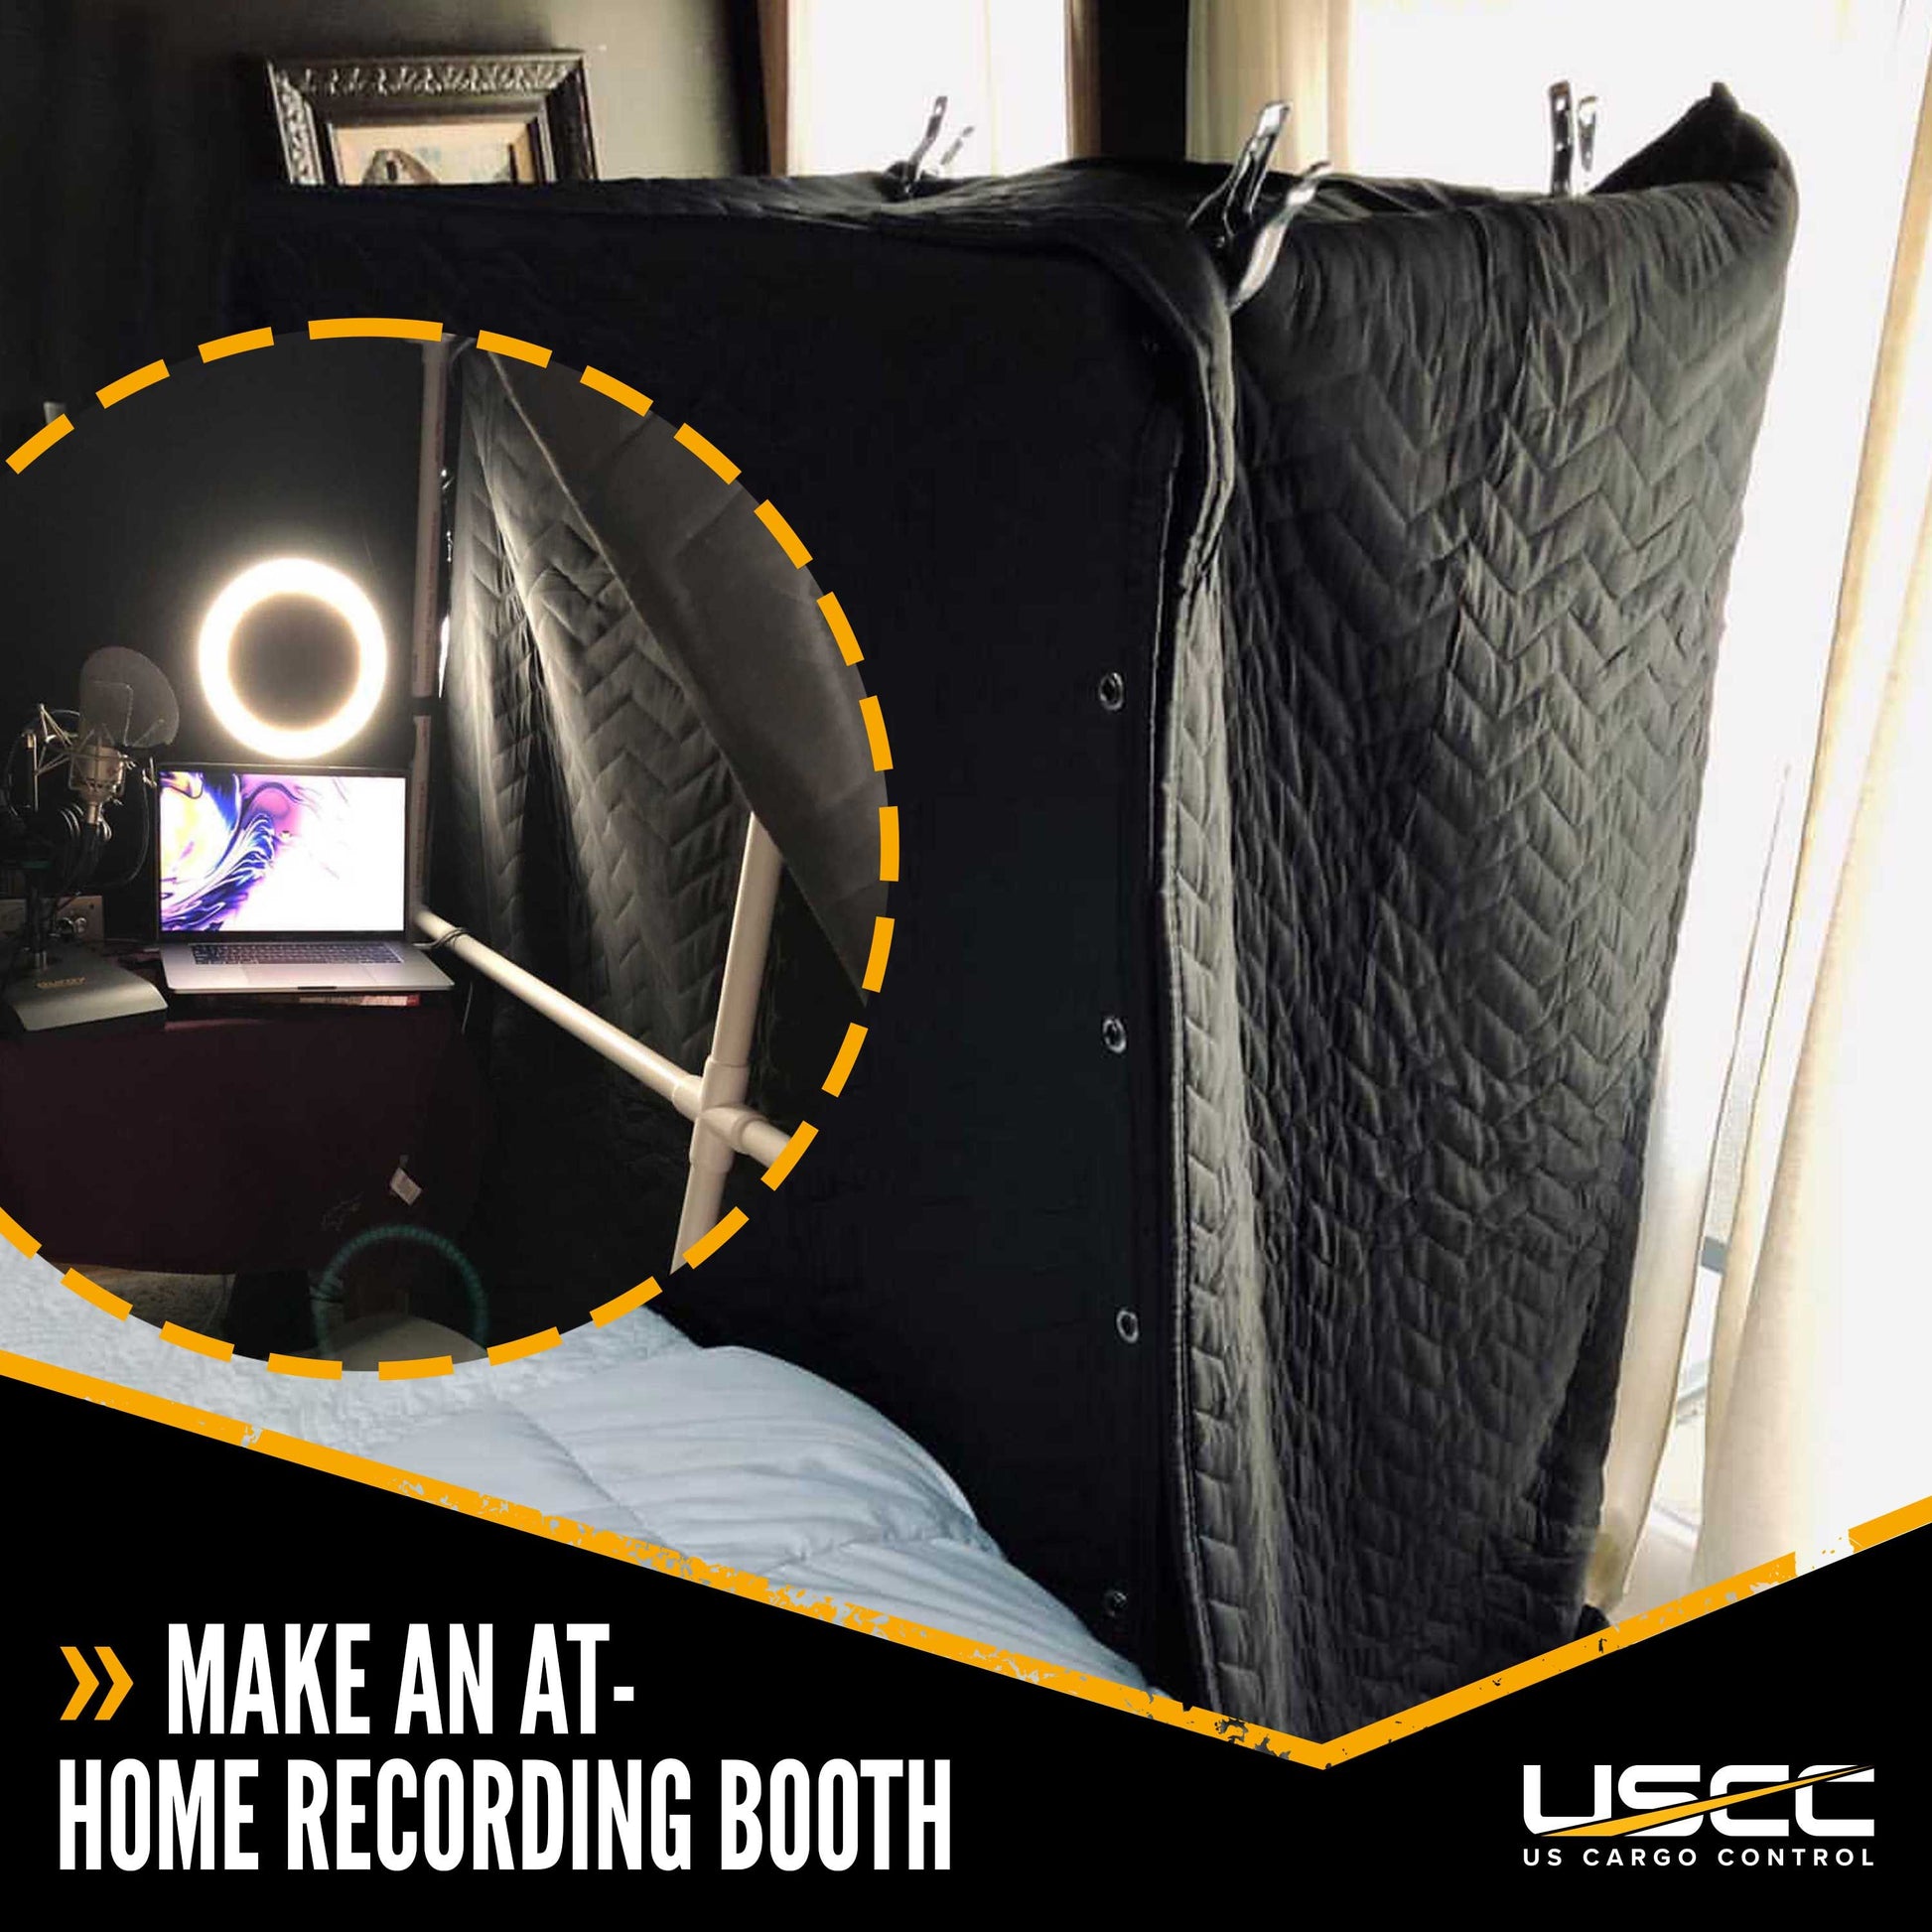 Sound blanket hanging solution - Do It Yourself - JWSOUNDGROUP